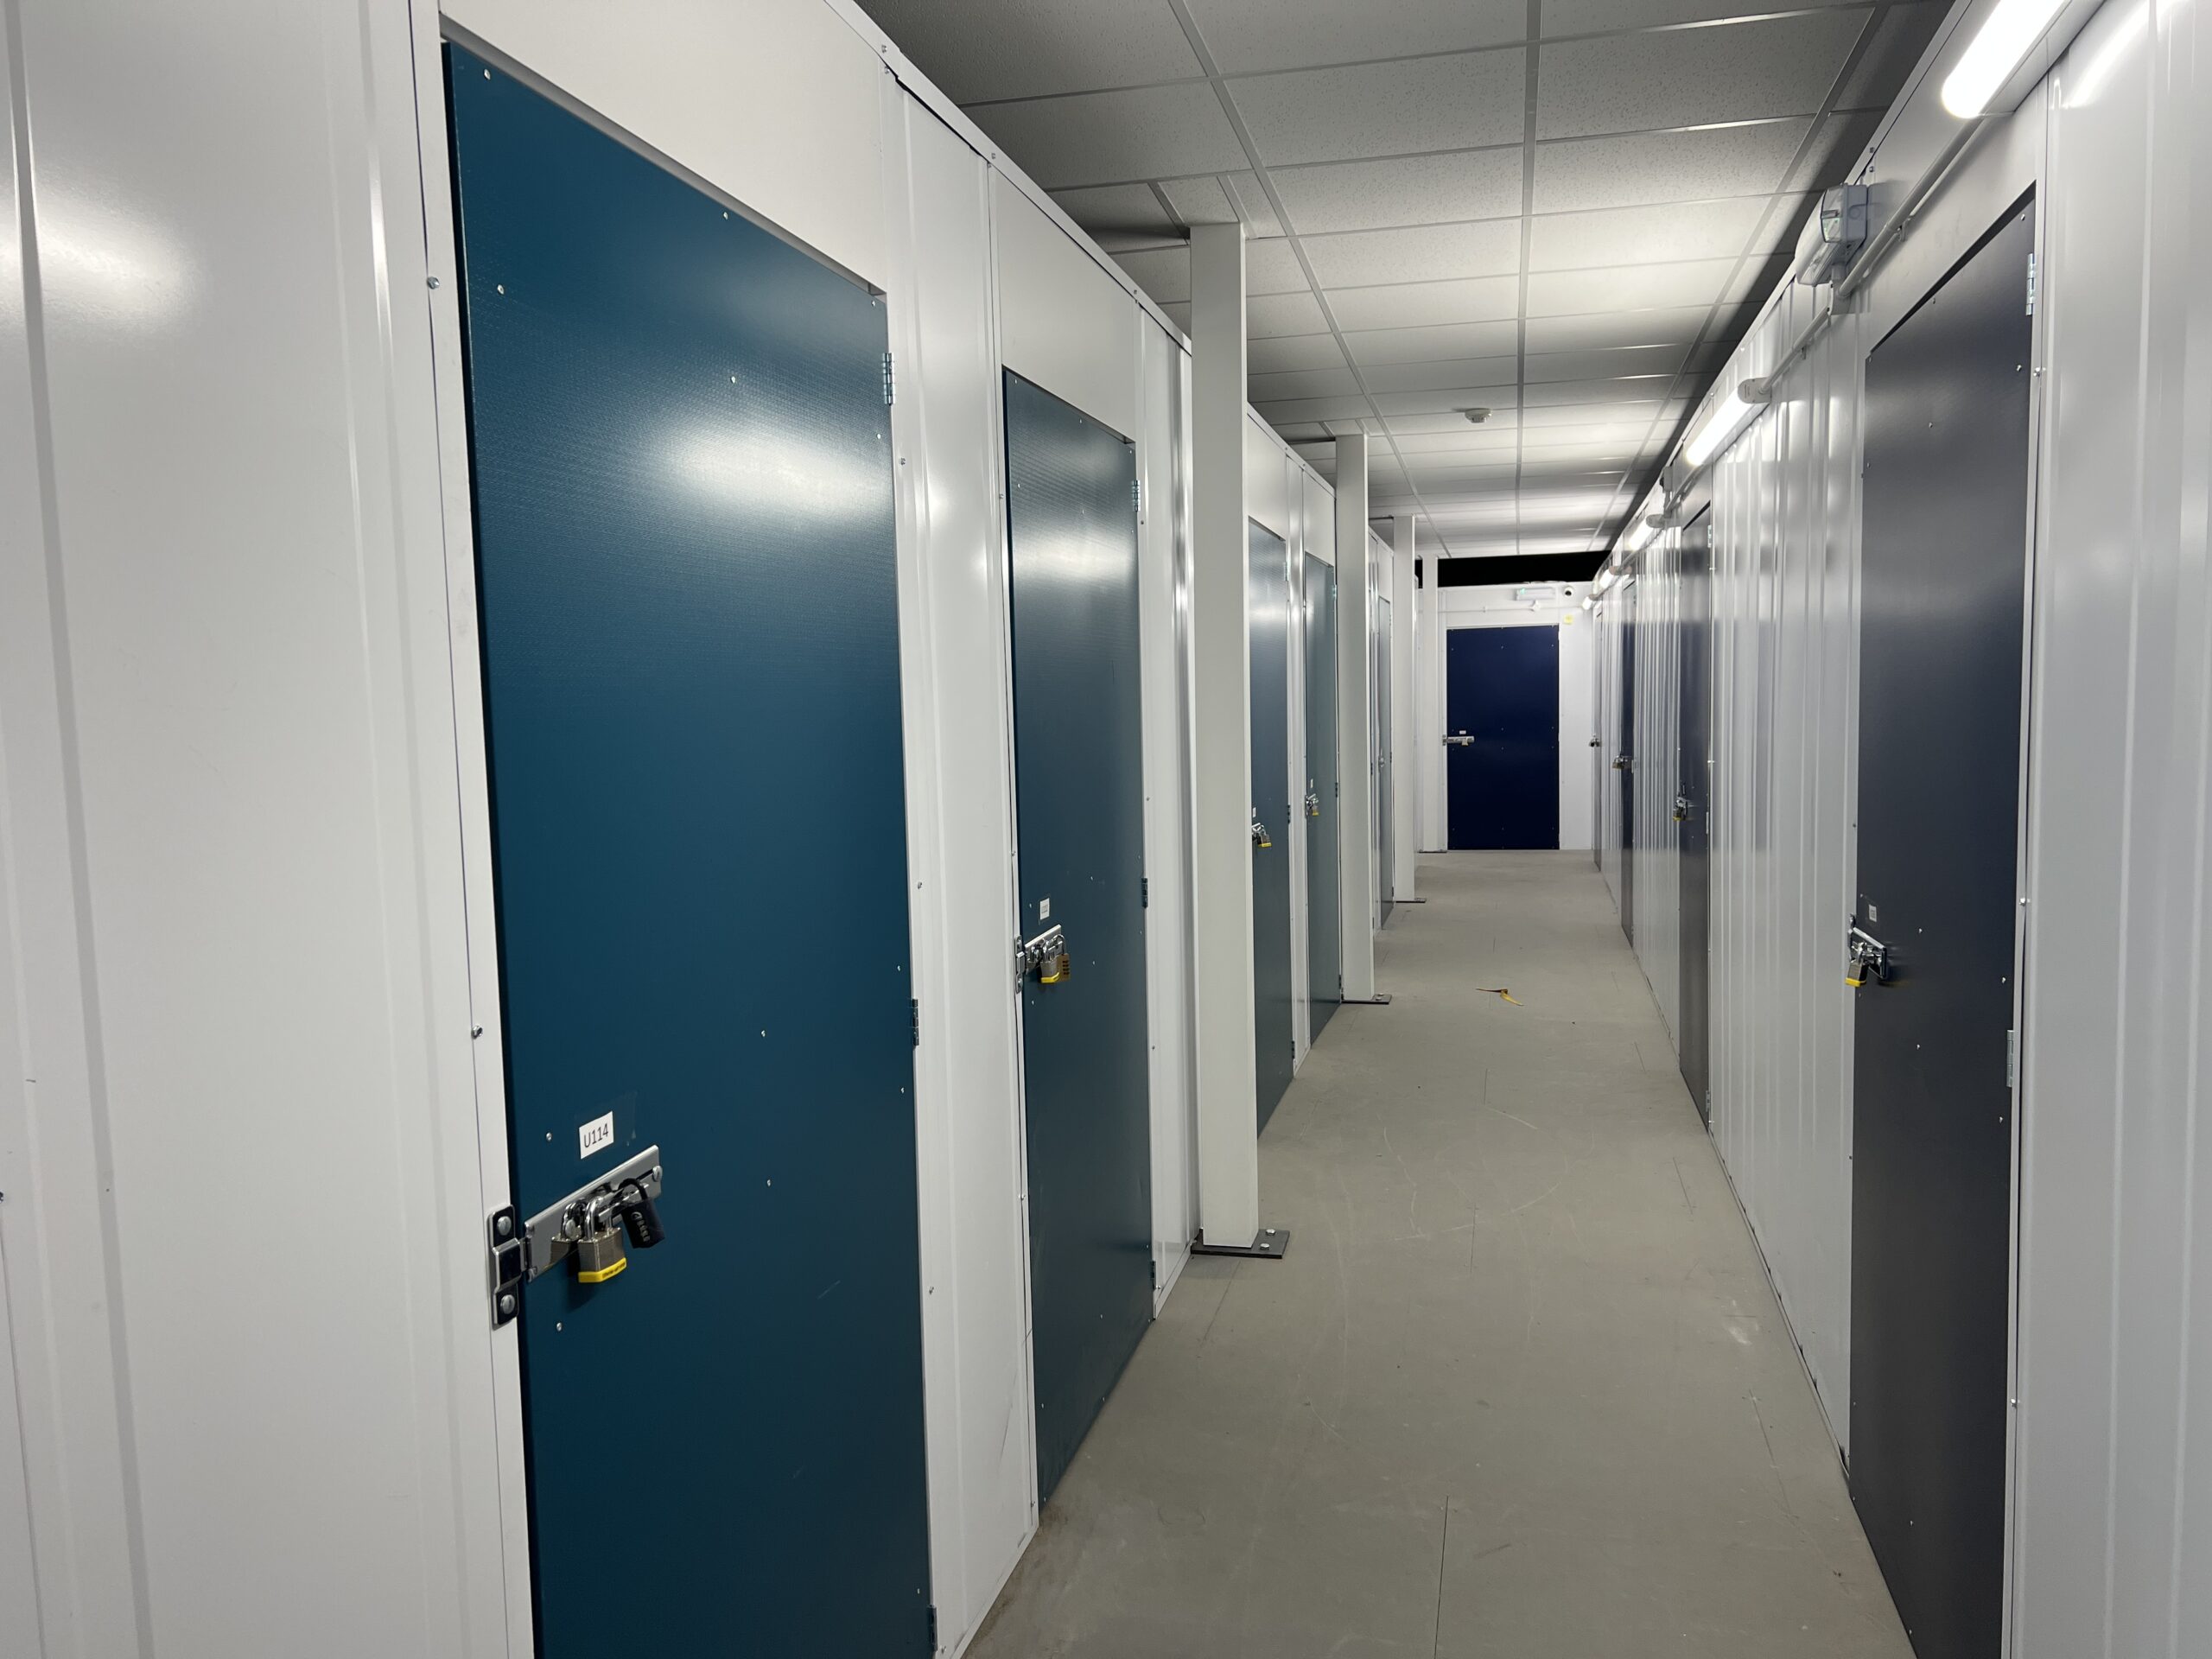 Penn Elcom launches UK’s first flat pack self-storage system as industry tops £1.08 billion